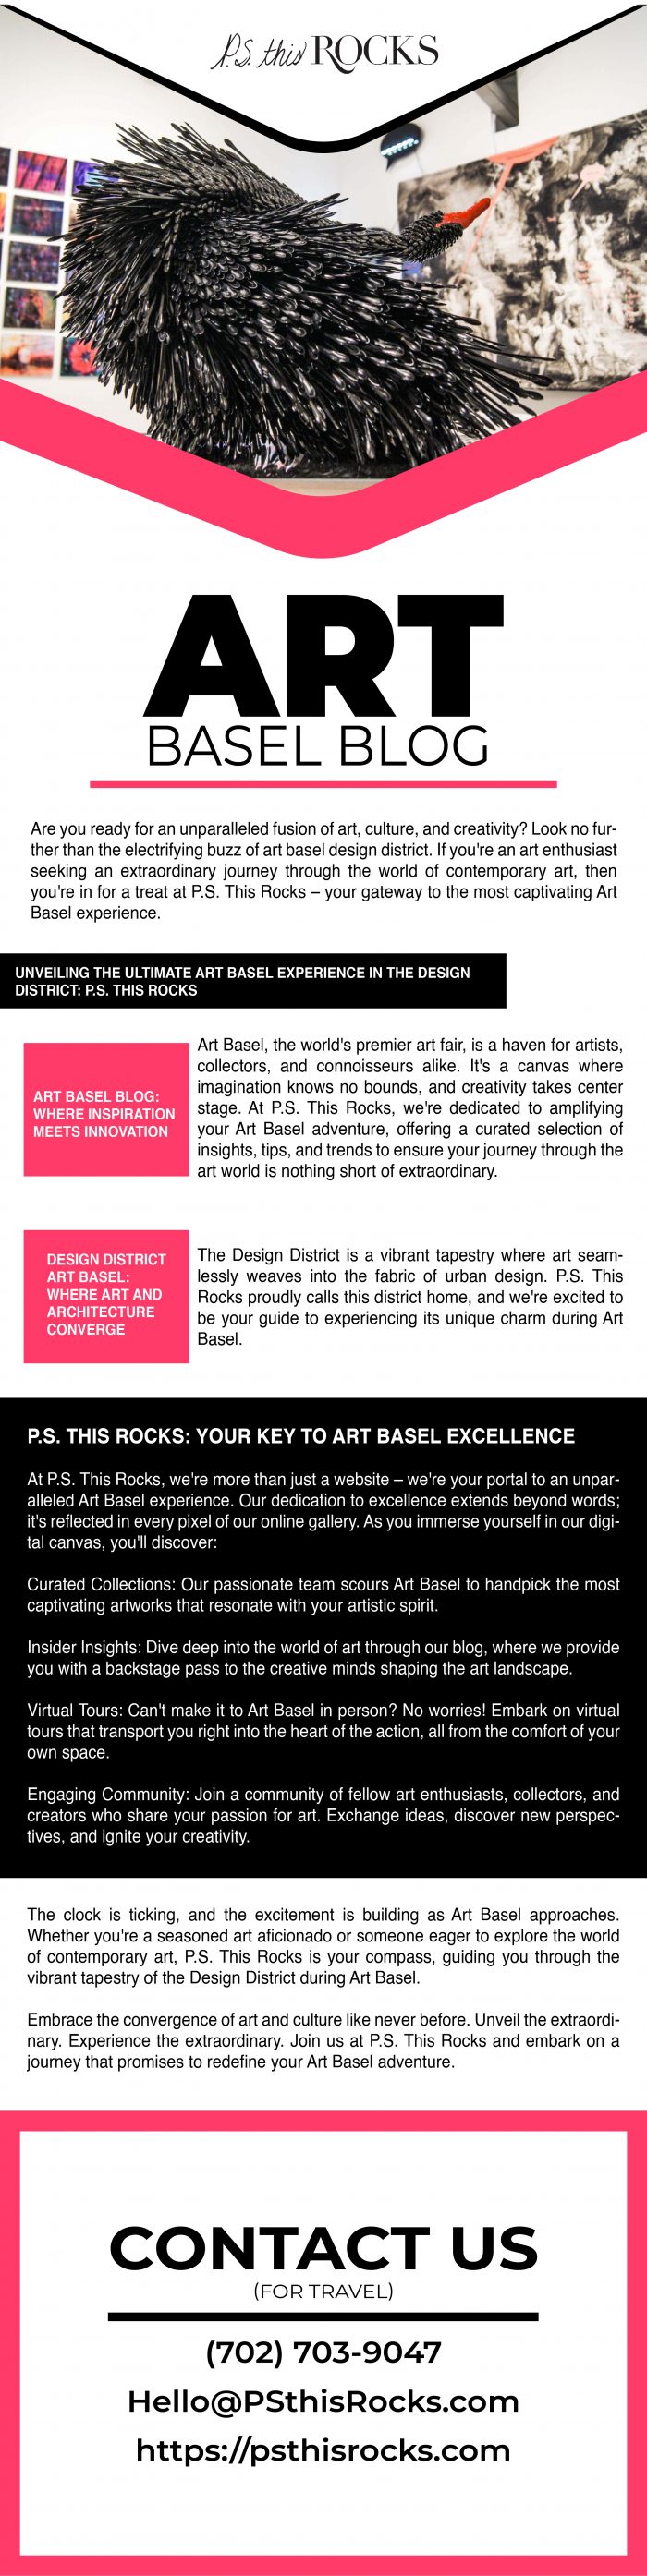 Discover the Art Basel Blog Experience with P.S. This Rocks!